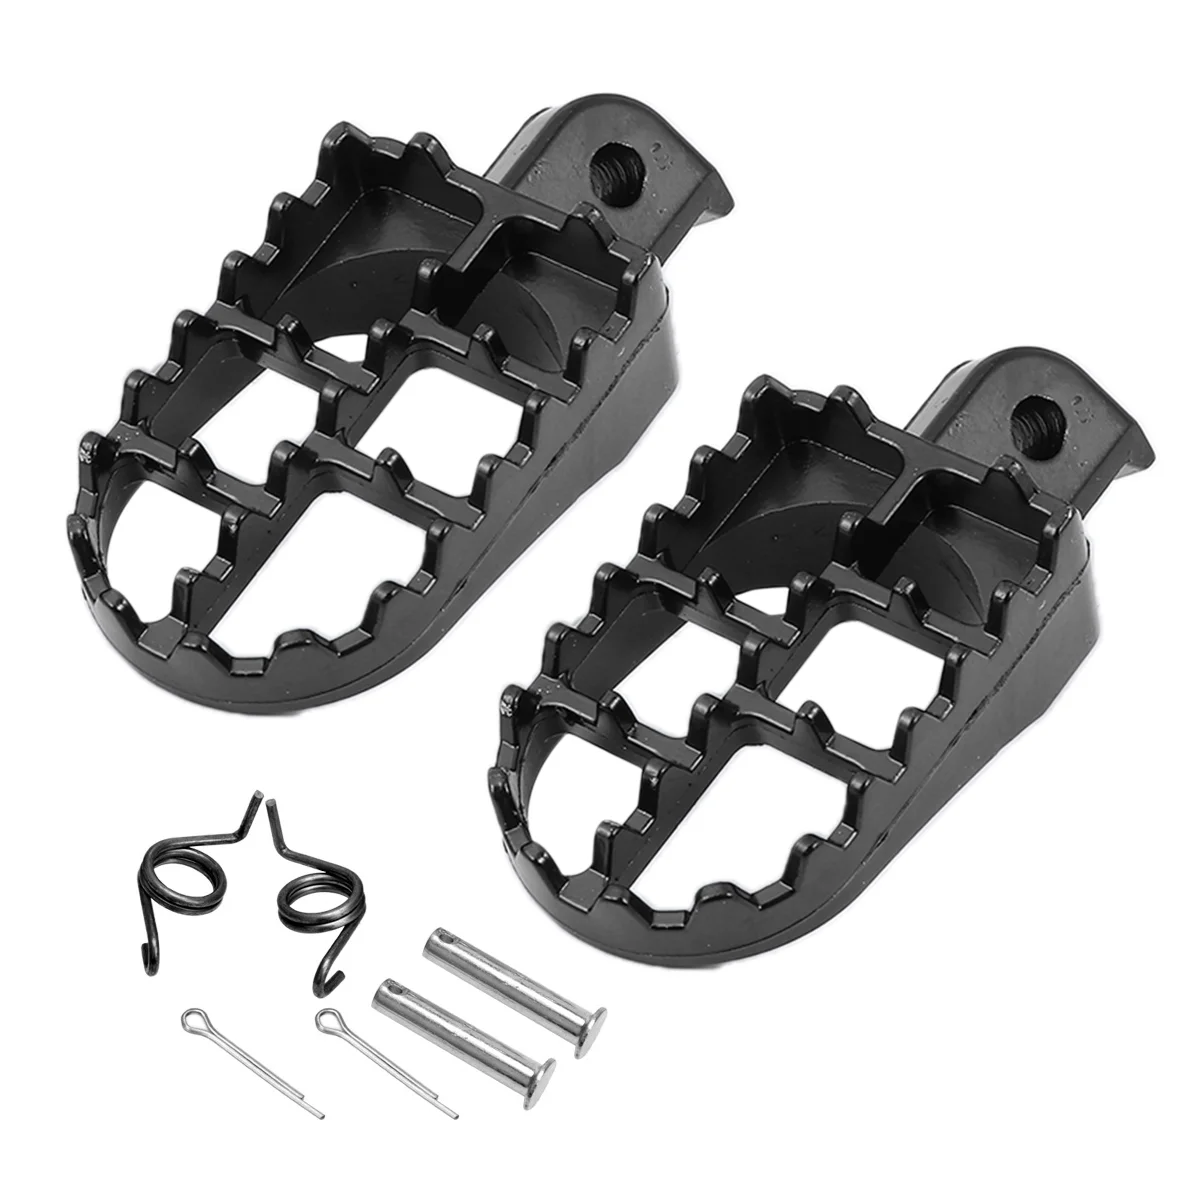 

2 Pcs Rear Pedal Road Motorcycle Accessory Footrest Peg Bike Pedals Accessories Cross-country Stainless Steel Dirt X-adv Xadv